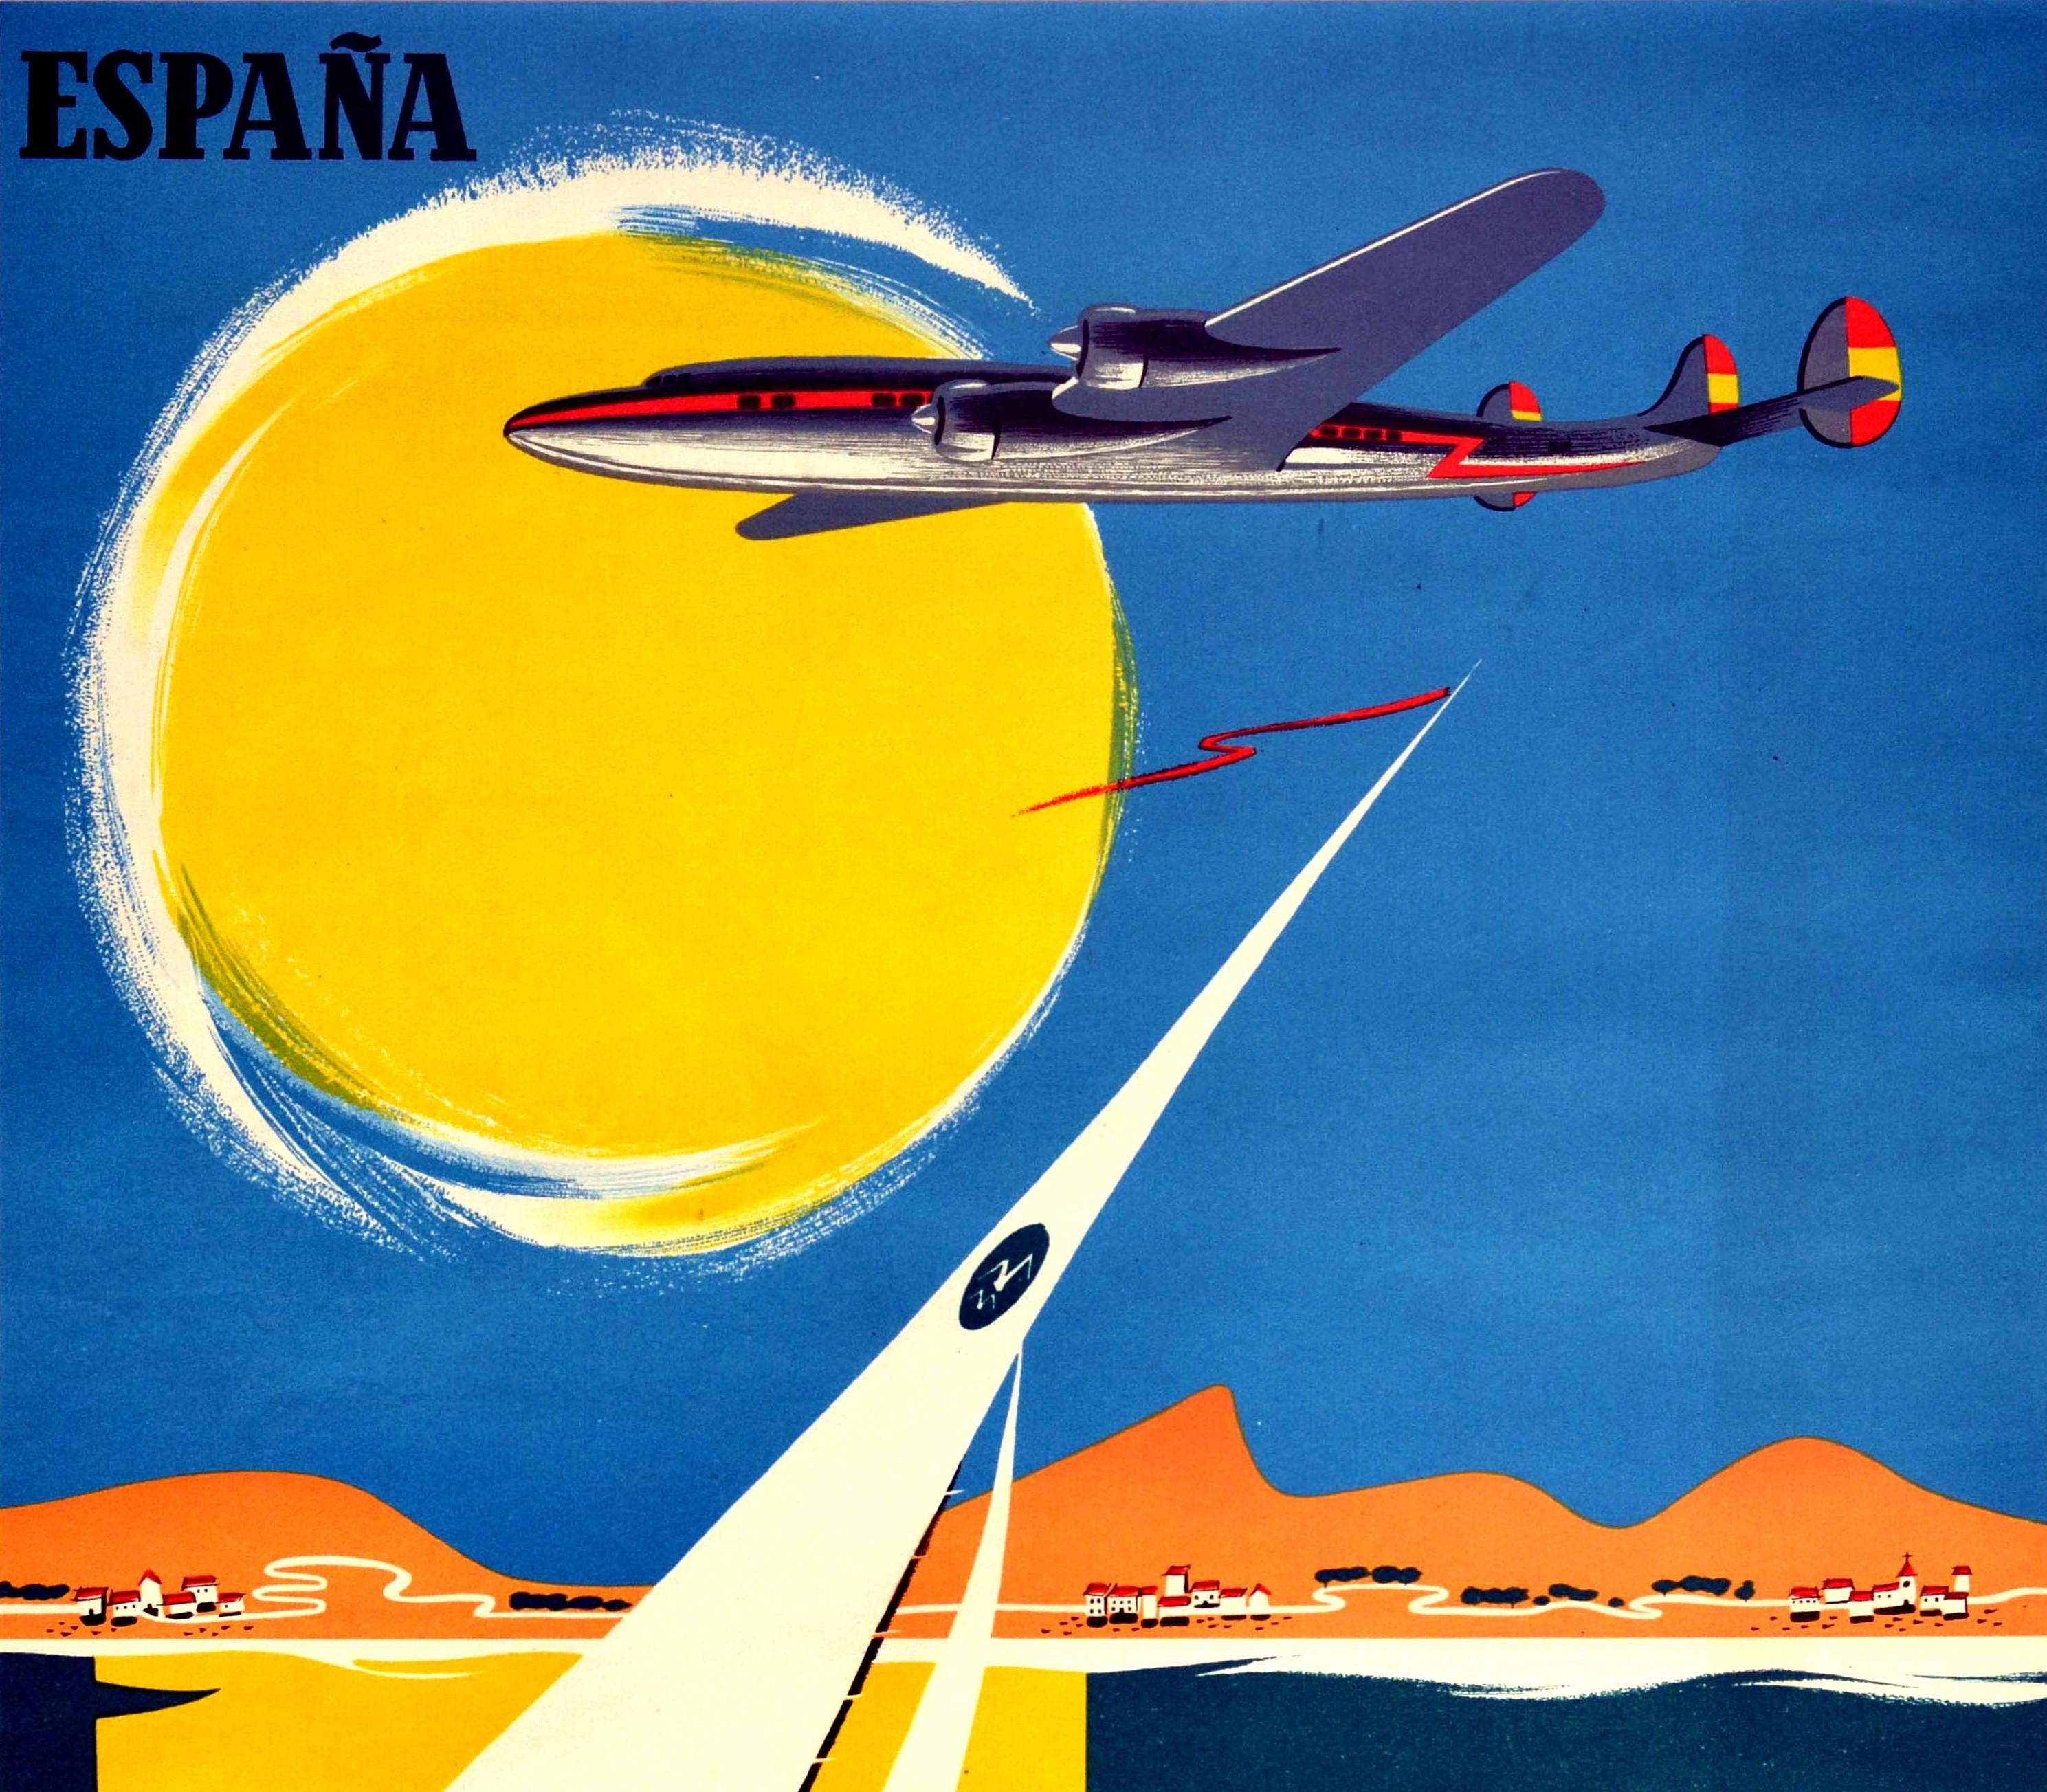 Original vintage Spanish airline travel advertising poster issued by Iberia Lineas Aereas de Espana for the Costa Del Sol Malaga featuring a colourful illustration of an Iberia Lockheed Constellation plane flying in front of a bright yellow sun in